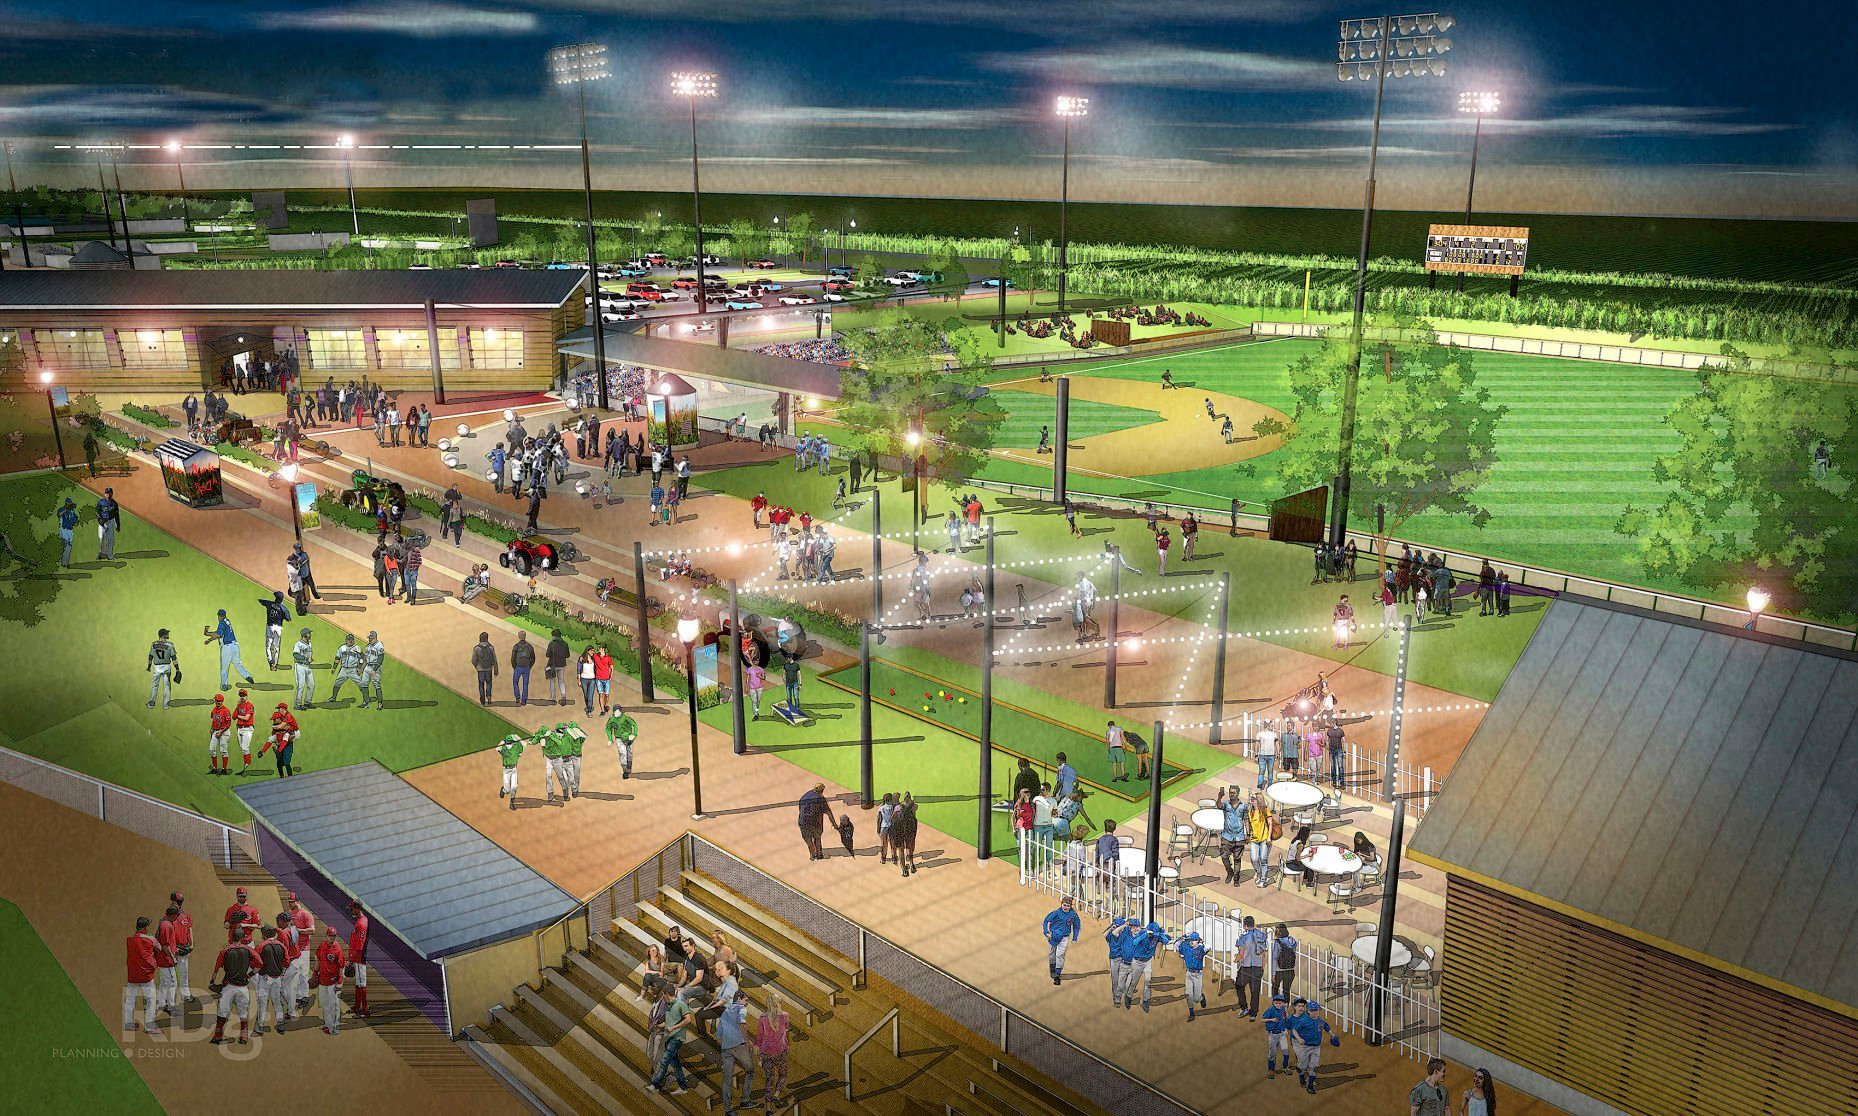 Nine youth baseball and softball fields will be added.    PHOTO CREDIT: Courtesy of RDG Planning & Desig